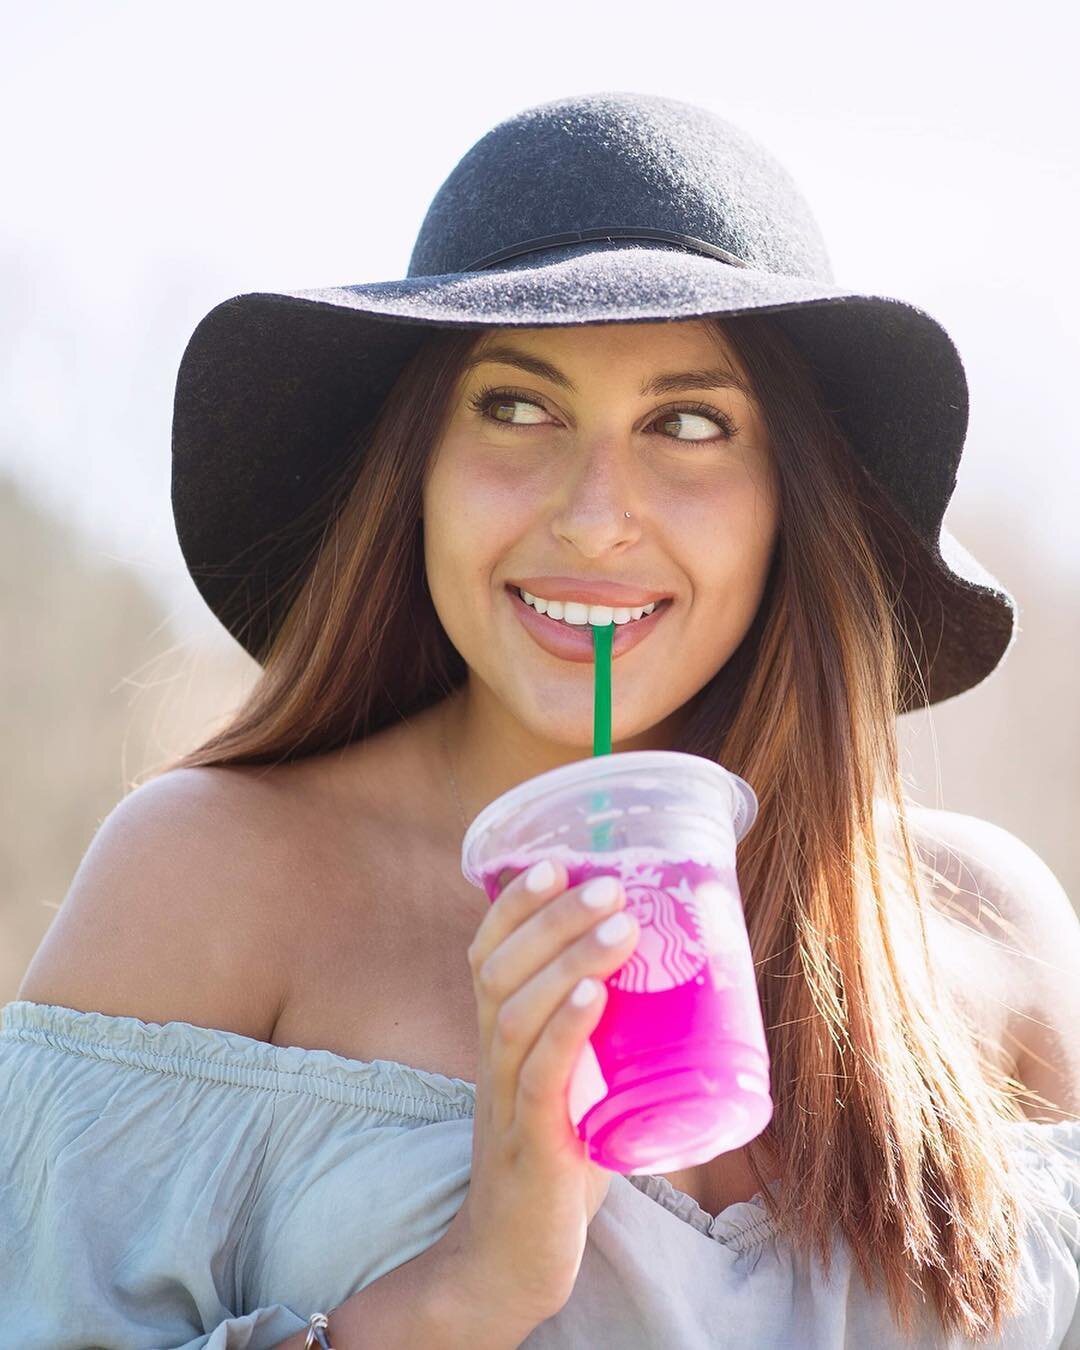 Allllll smiles! How beautiful is this lovely girl?✨💖☀️😇.
.
.
.
.
.
.

#spring #photography #toronto #torontophotographer #thebachelorette #thebachelor #torontophotography #cute #love #photography #starbucks #springphotoshoot